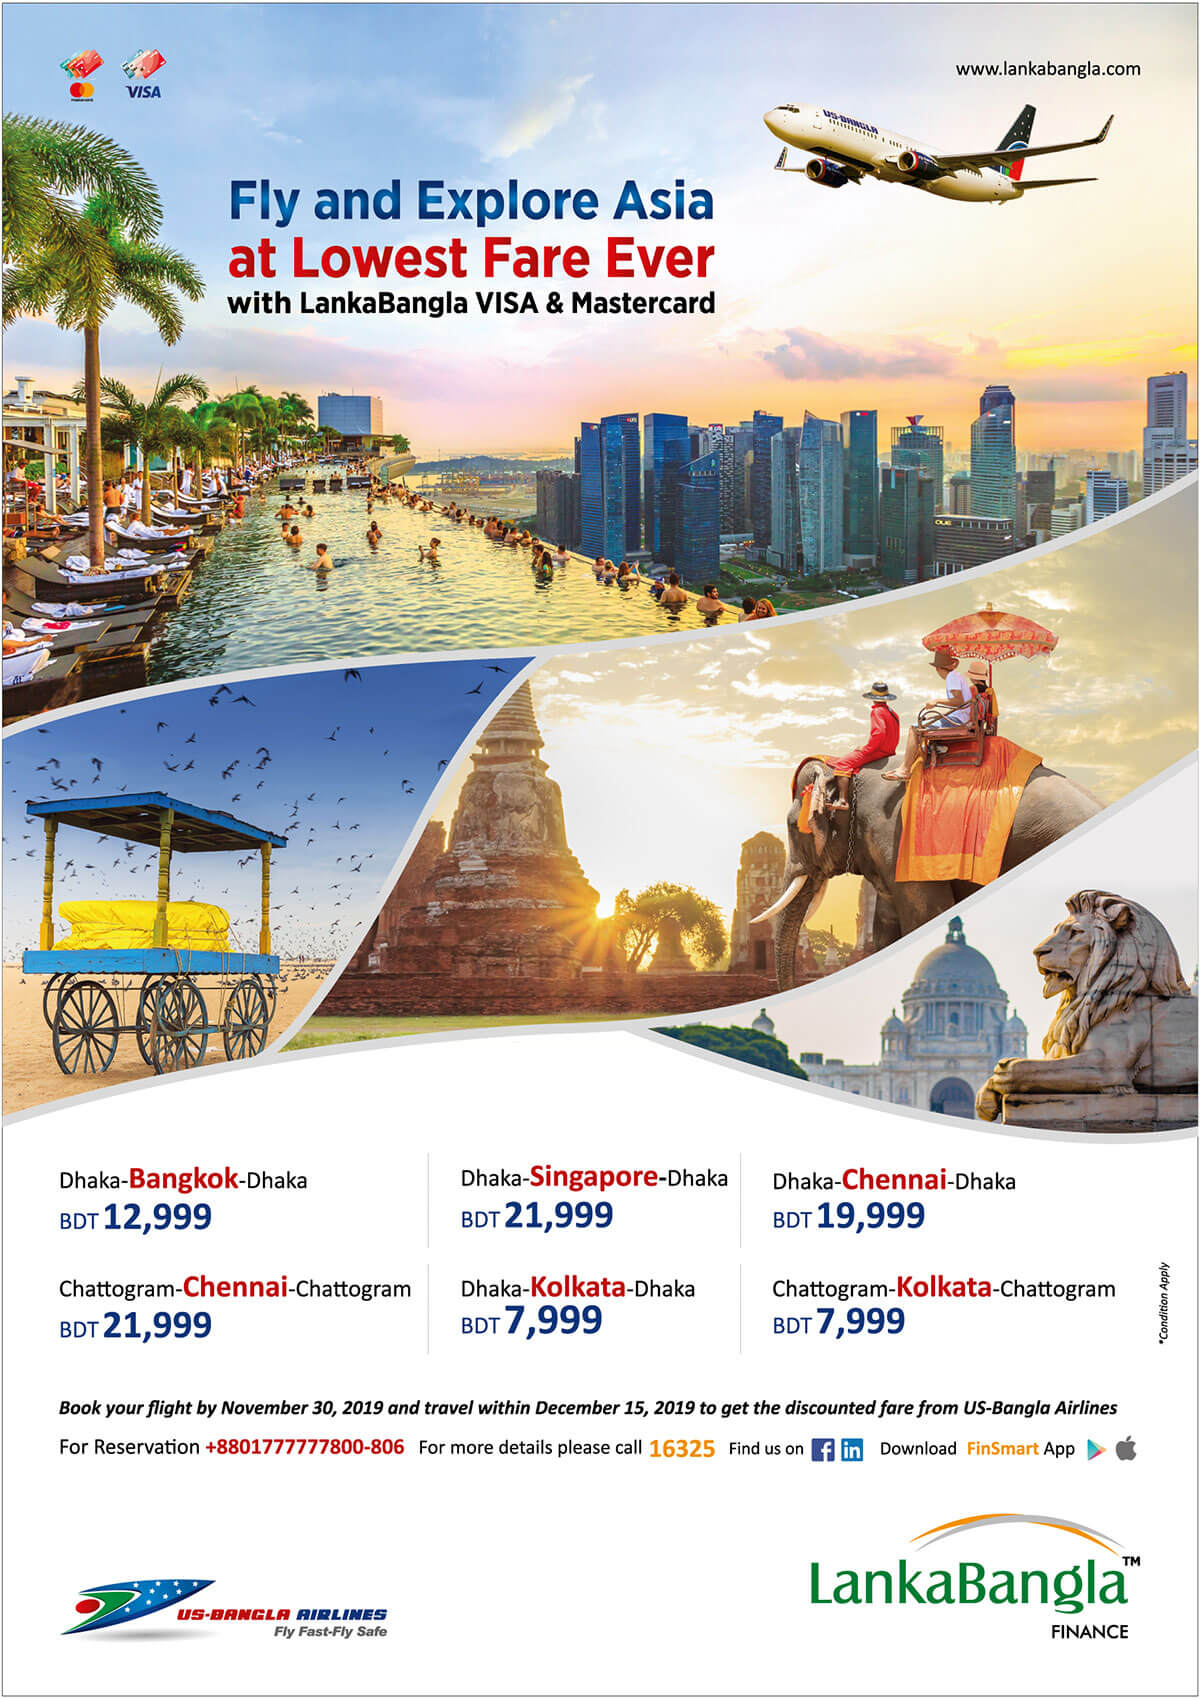 Fly and Explore Asia at Lowest Fare Ever